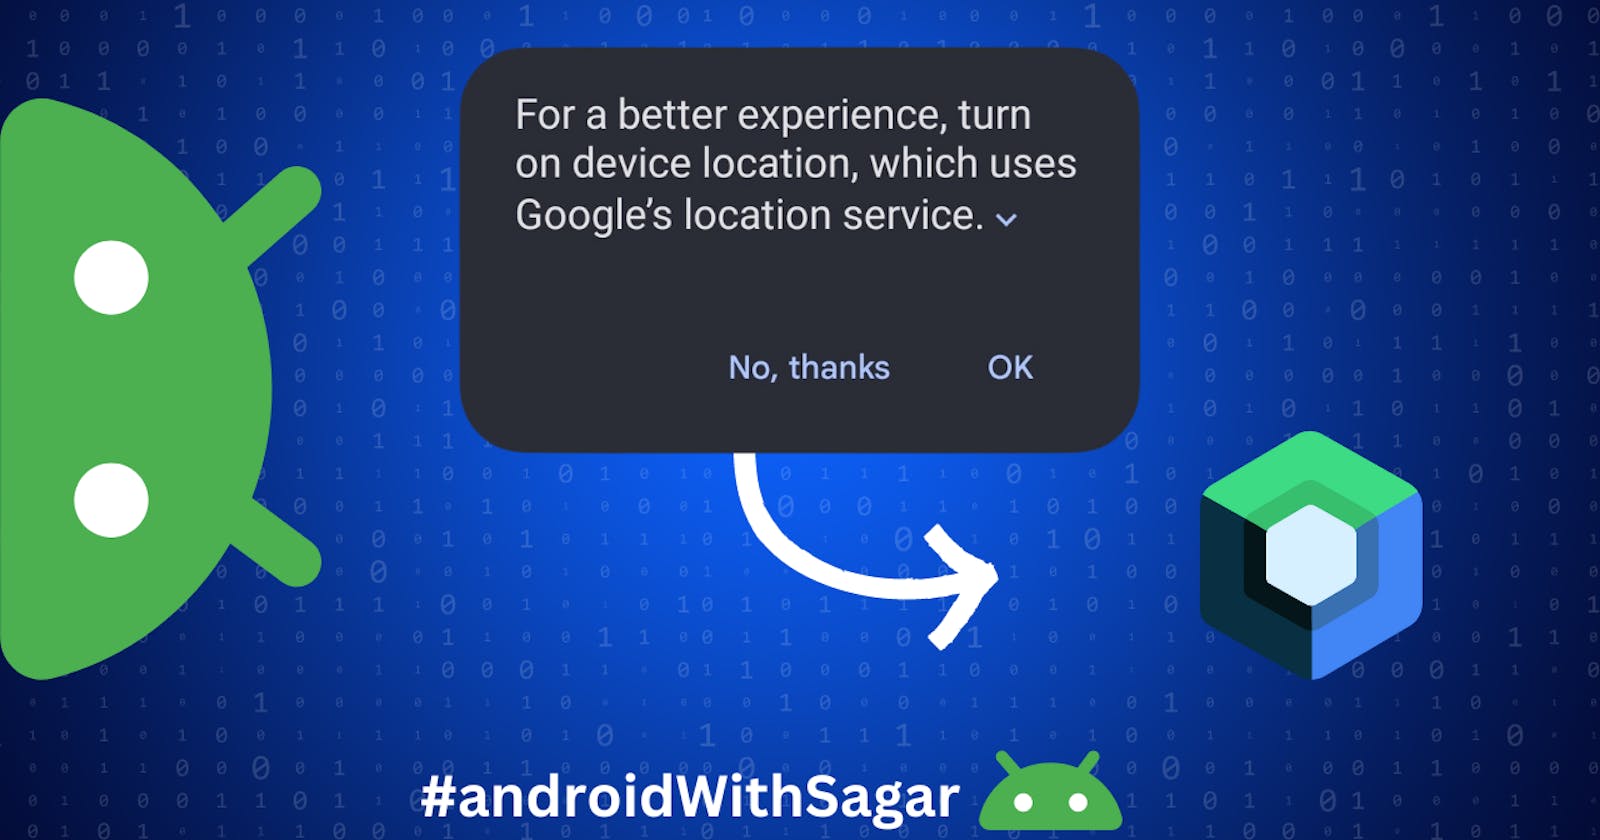 Show ‘Turn on device location’ Request(like Google Maps) in Jetpack Compose